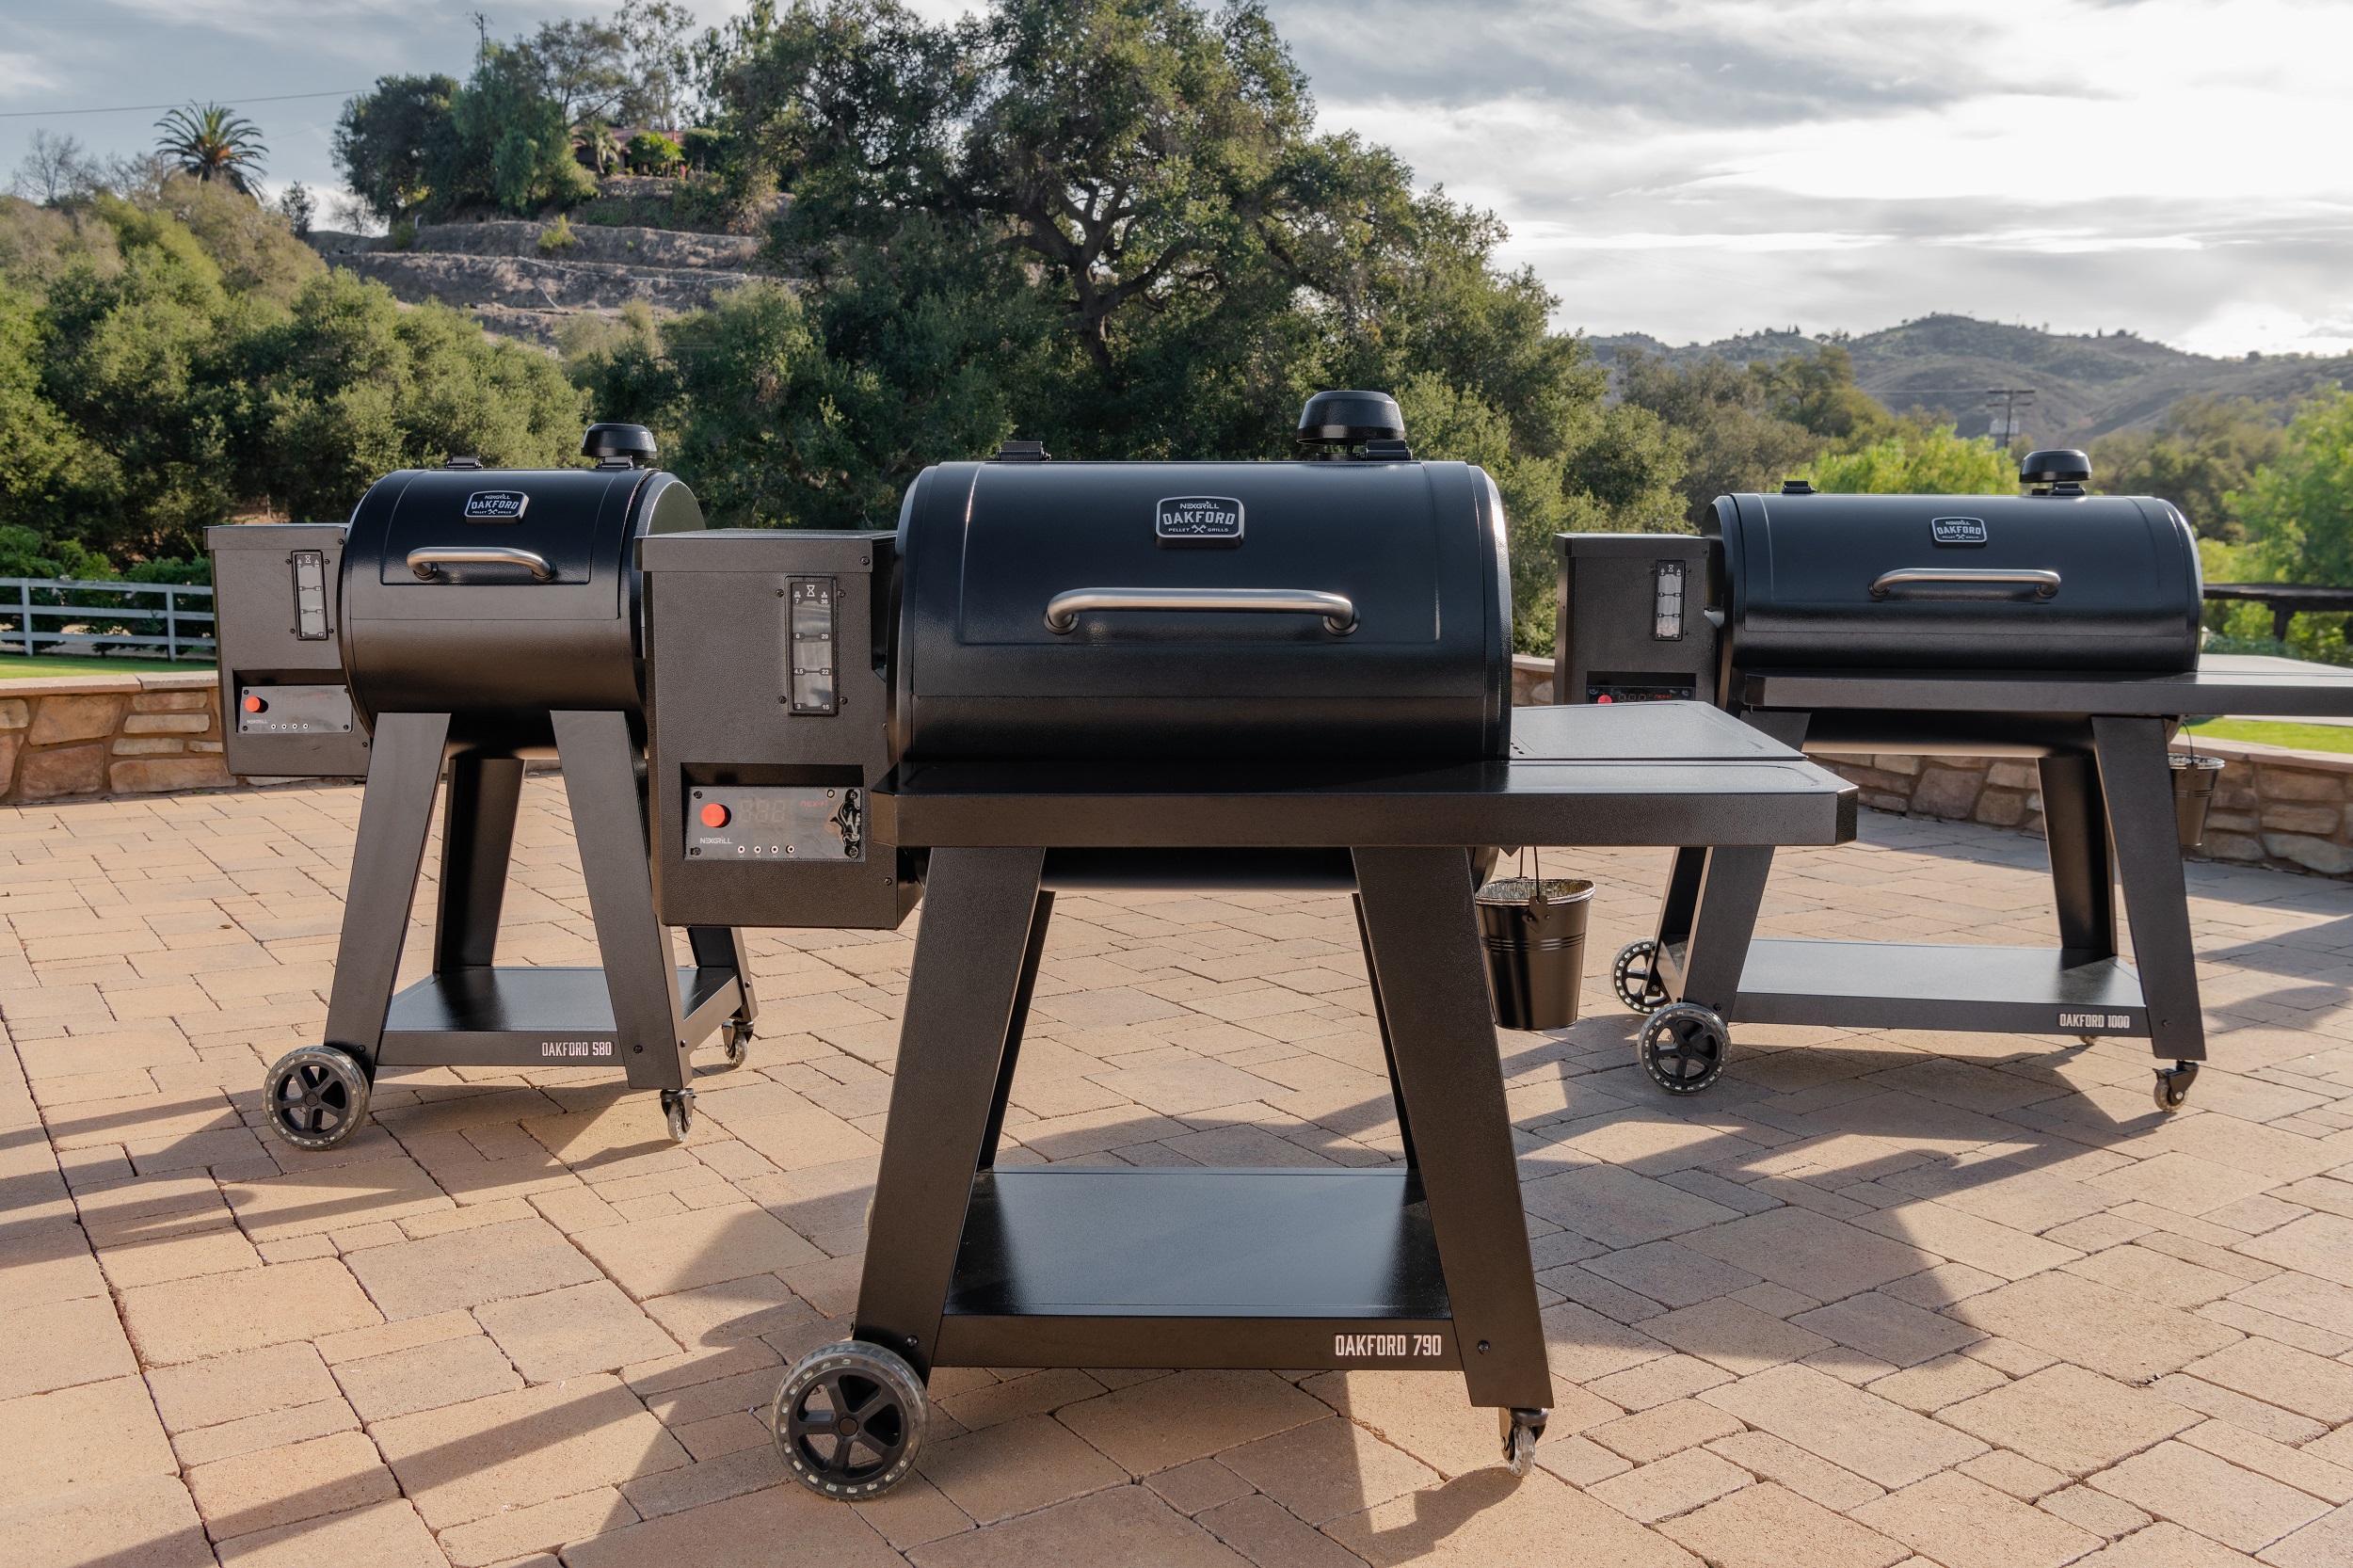 Sister brands under Global Leisure – Megamaster and Nexgrill partnered to expand globally and bring the new Oakford™ Pellet Grills to South Africa.